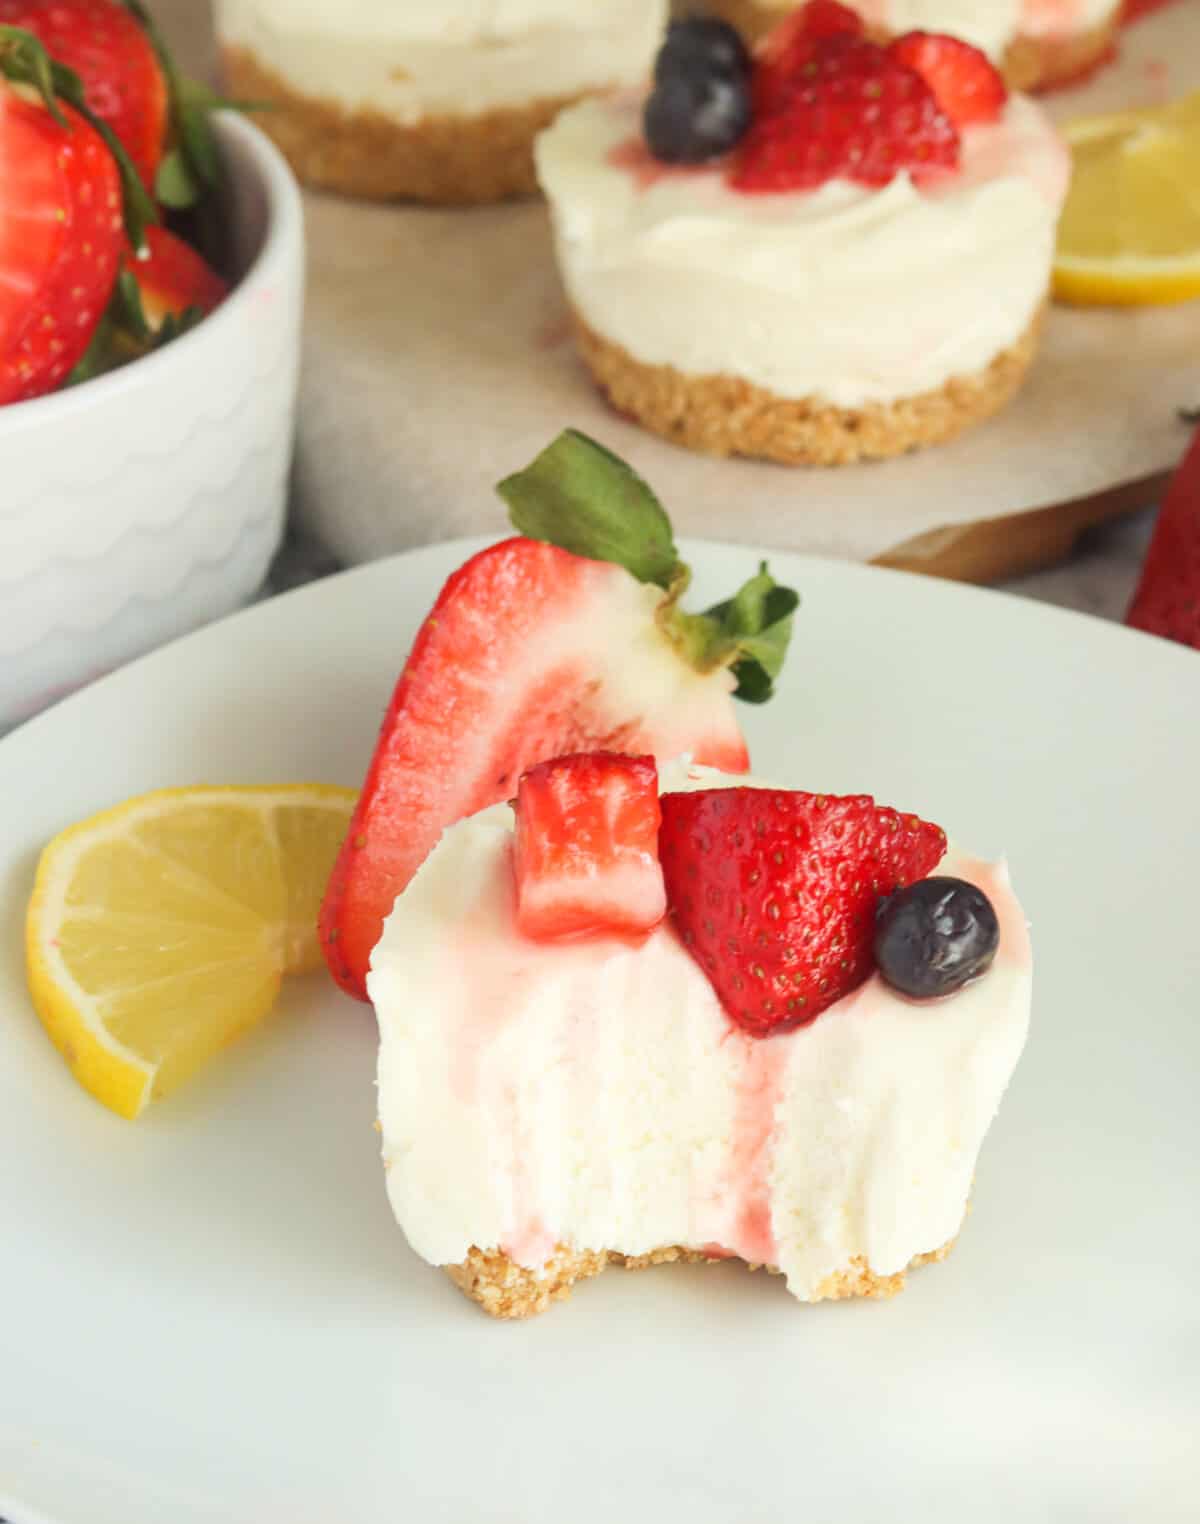 A bite is missing from a no-bake cheesecake bite topped with a strawberry and blueberry